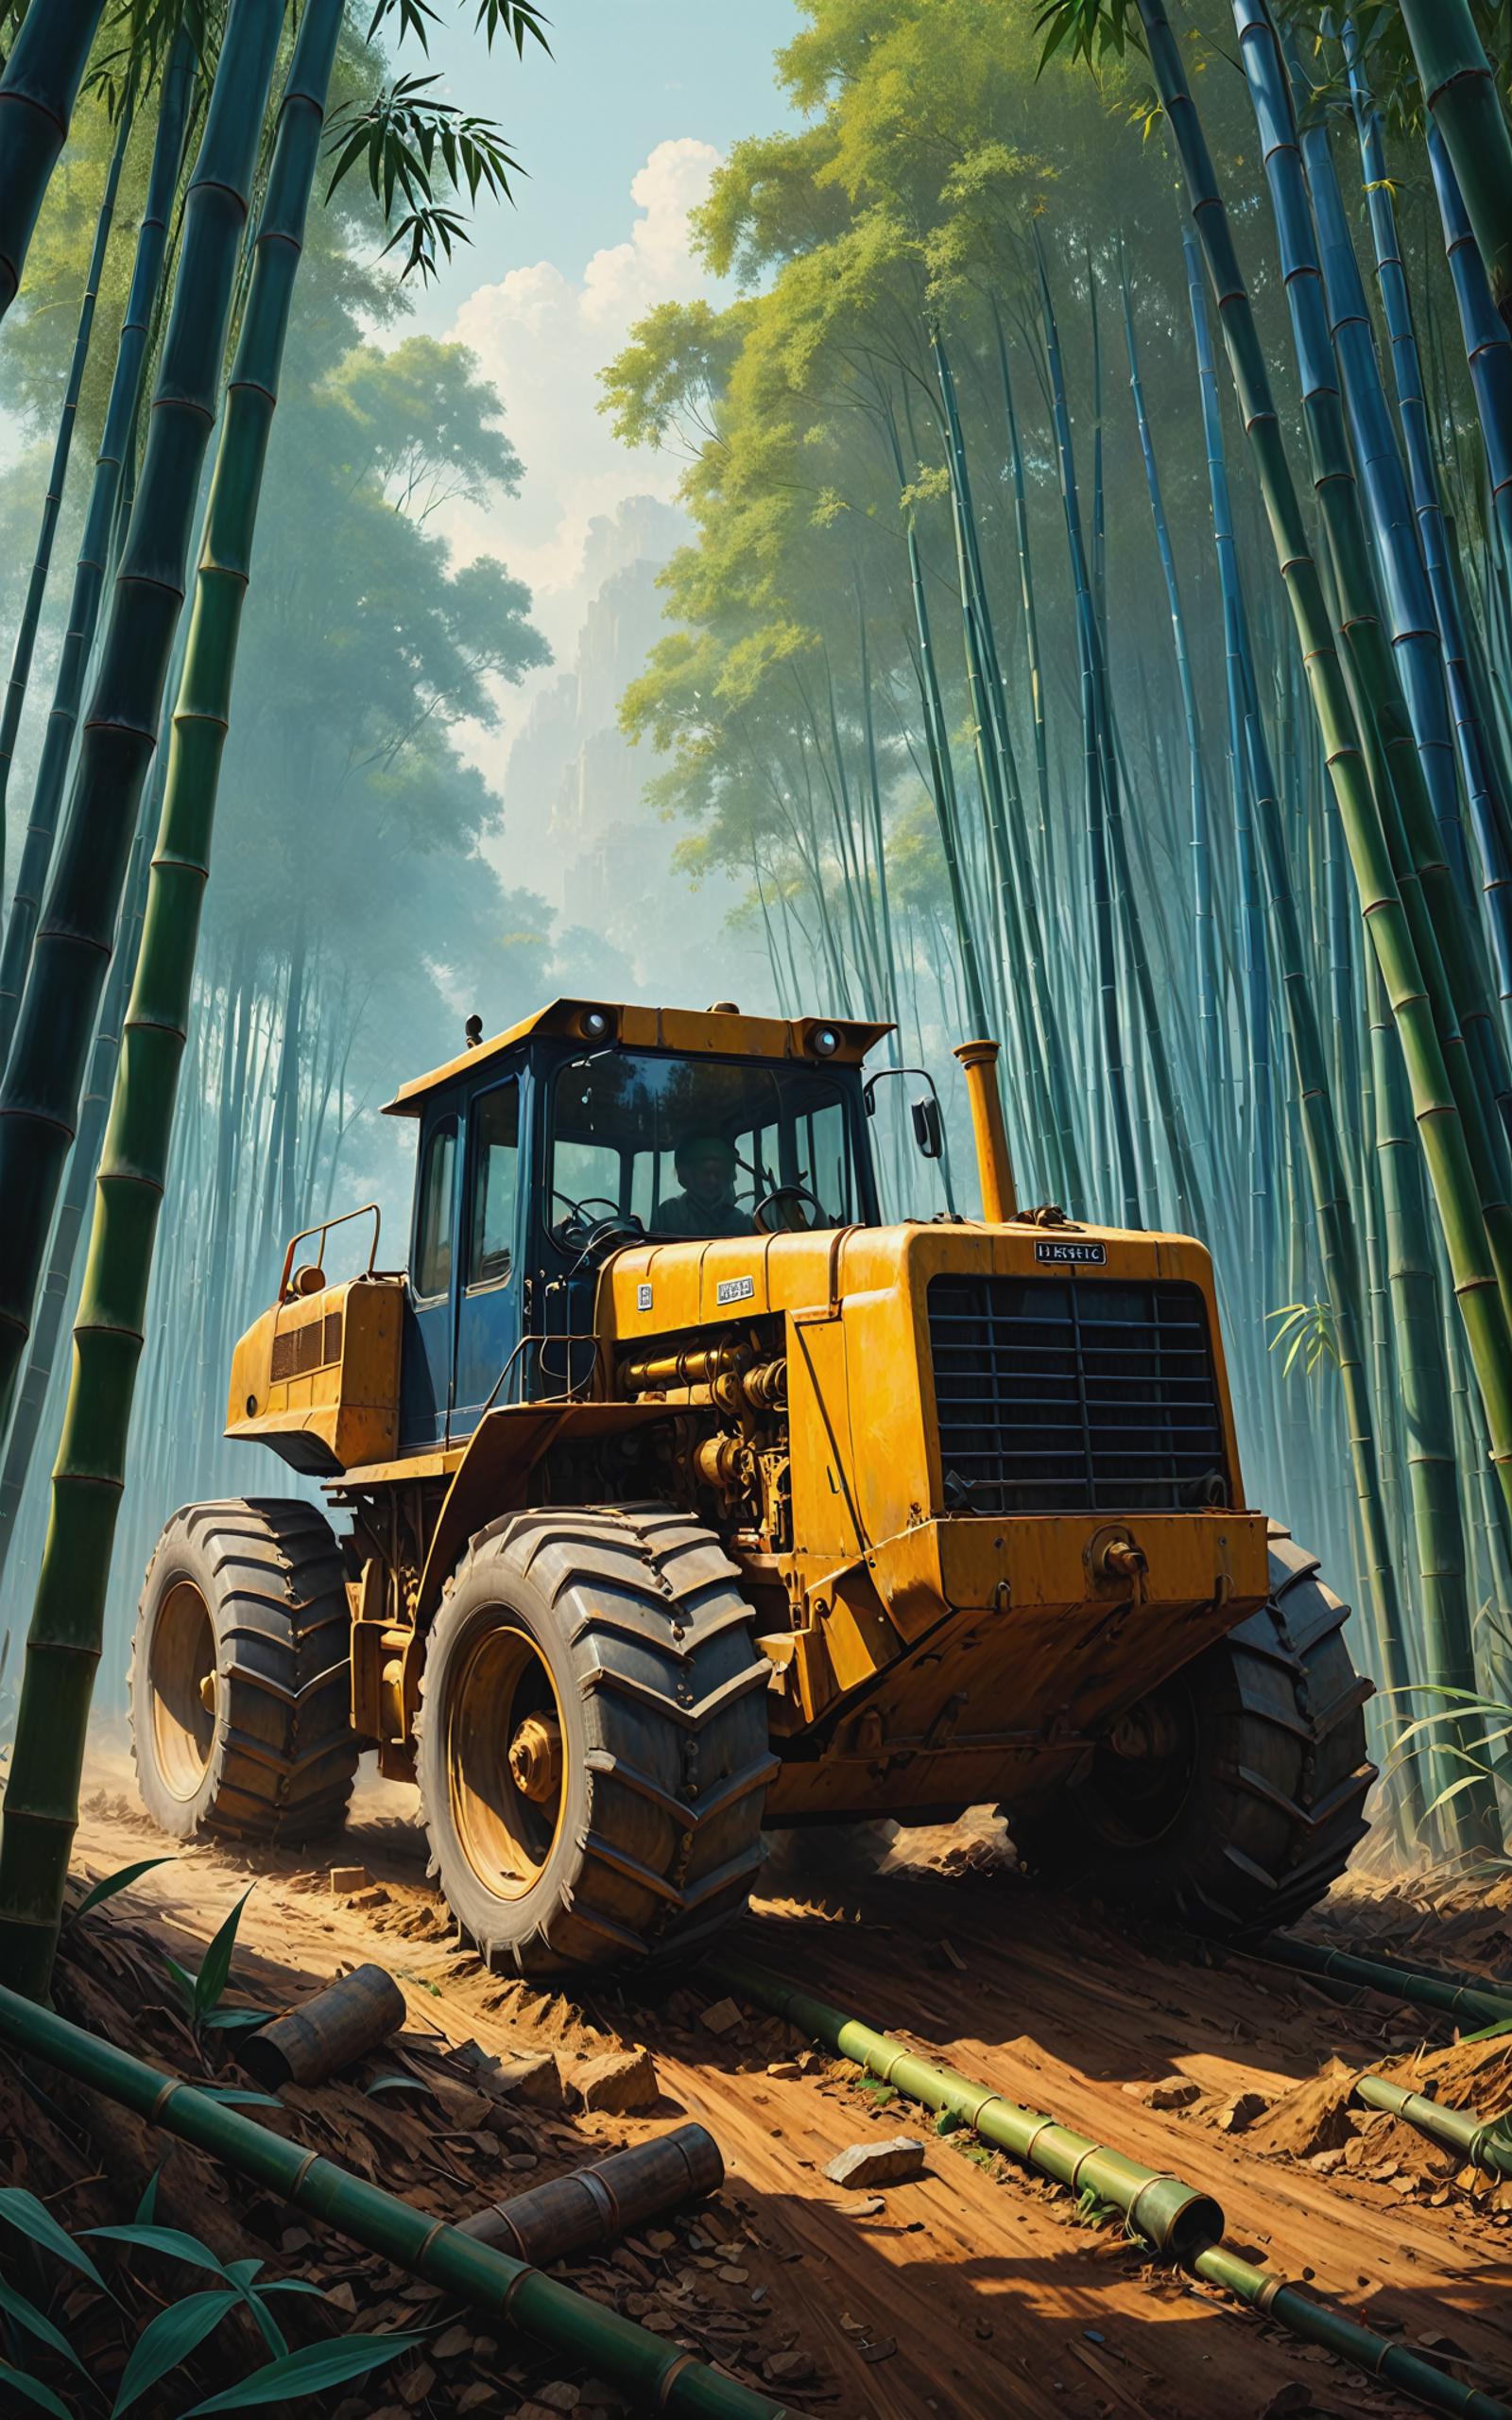 A bulldozer driving through a forest of bamboo trees